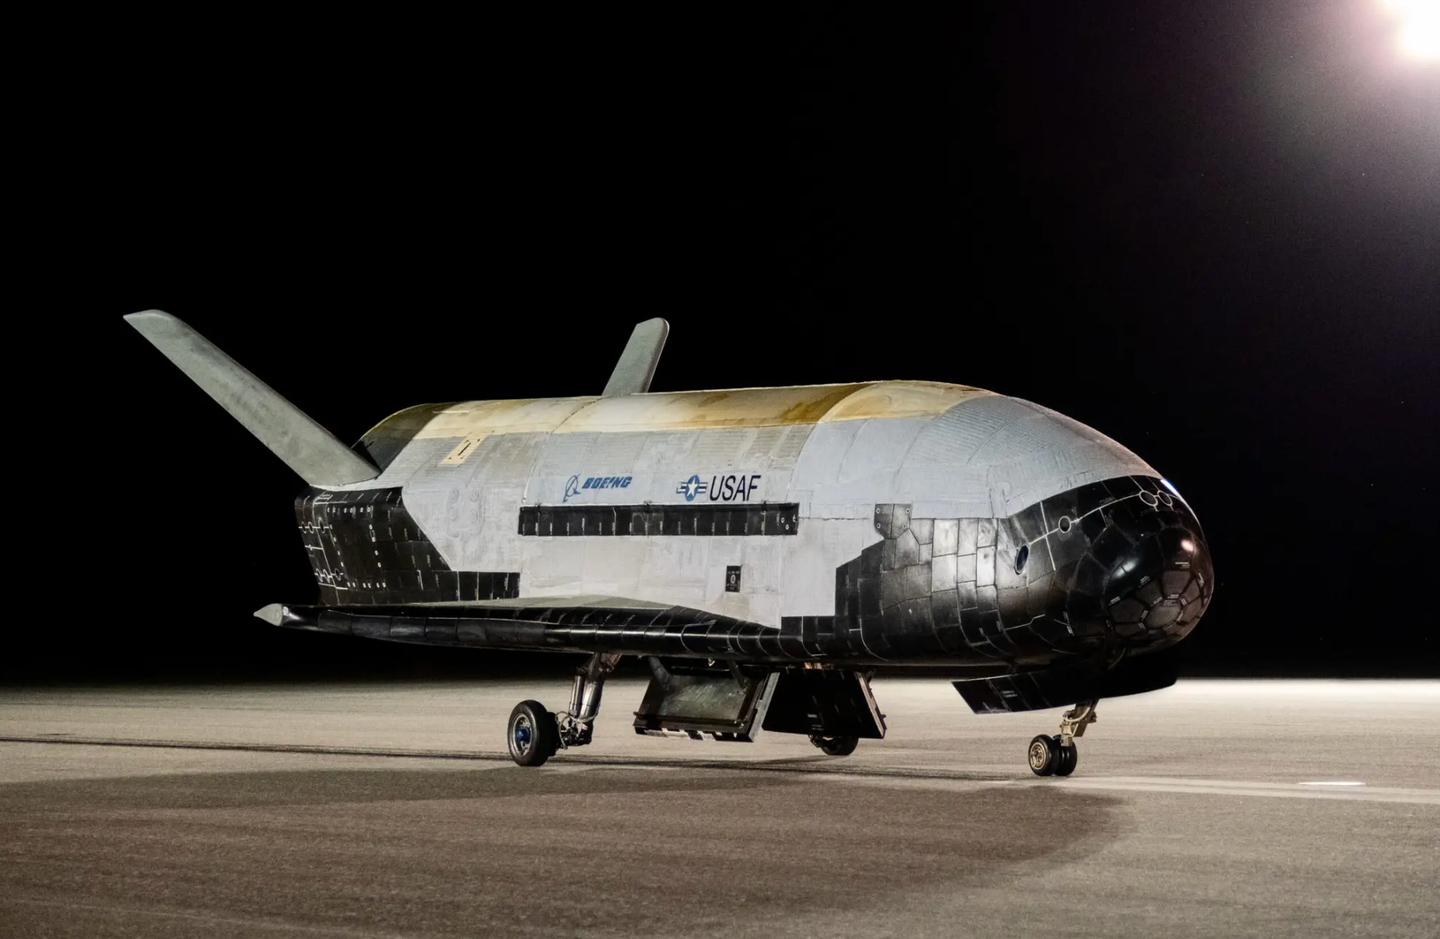 The X-37B rests on the flight line at Kennedy Space Center, Florida, on November 12, 2022, after it concluded its sixth successful mission that lasted 908 days.&nbsp;<em>U.S. Air Force photo by Staff Sgt. Adam Shank</em>